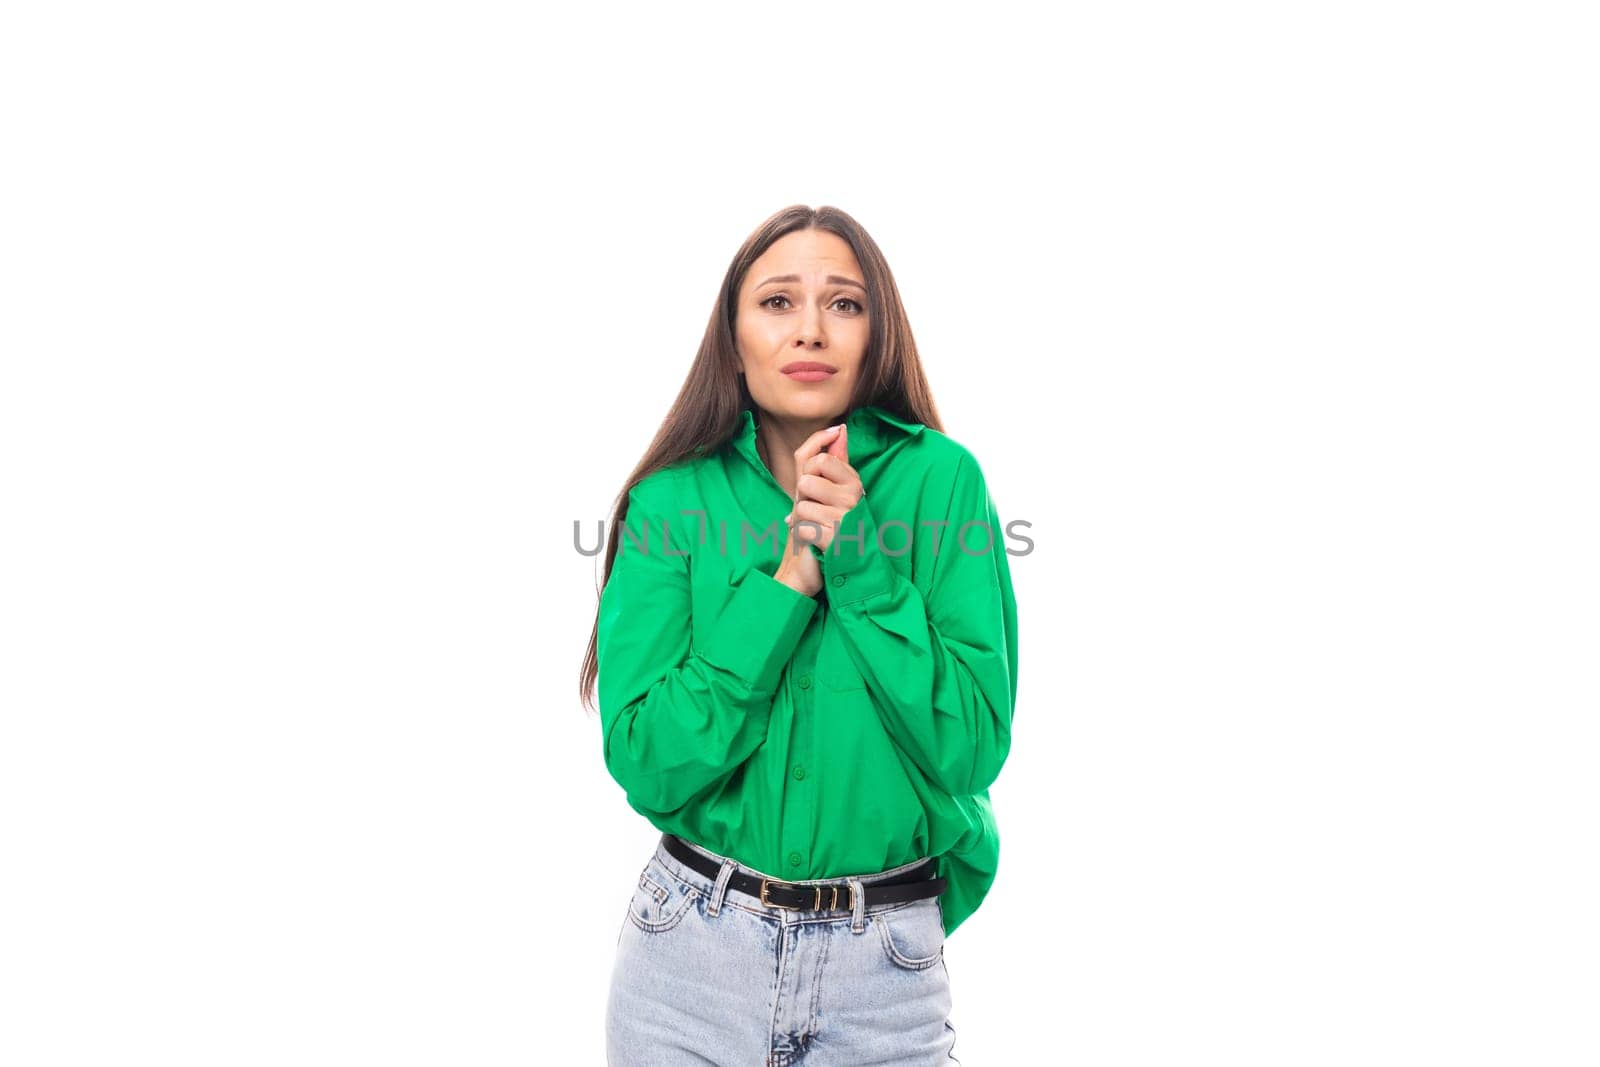 modest well-groomed brunette long-haired young woman in a green shirt on a white background with copy space by TRMK